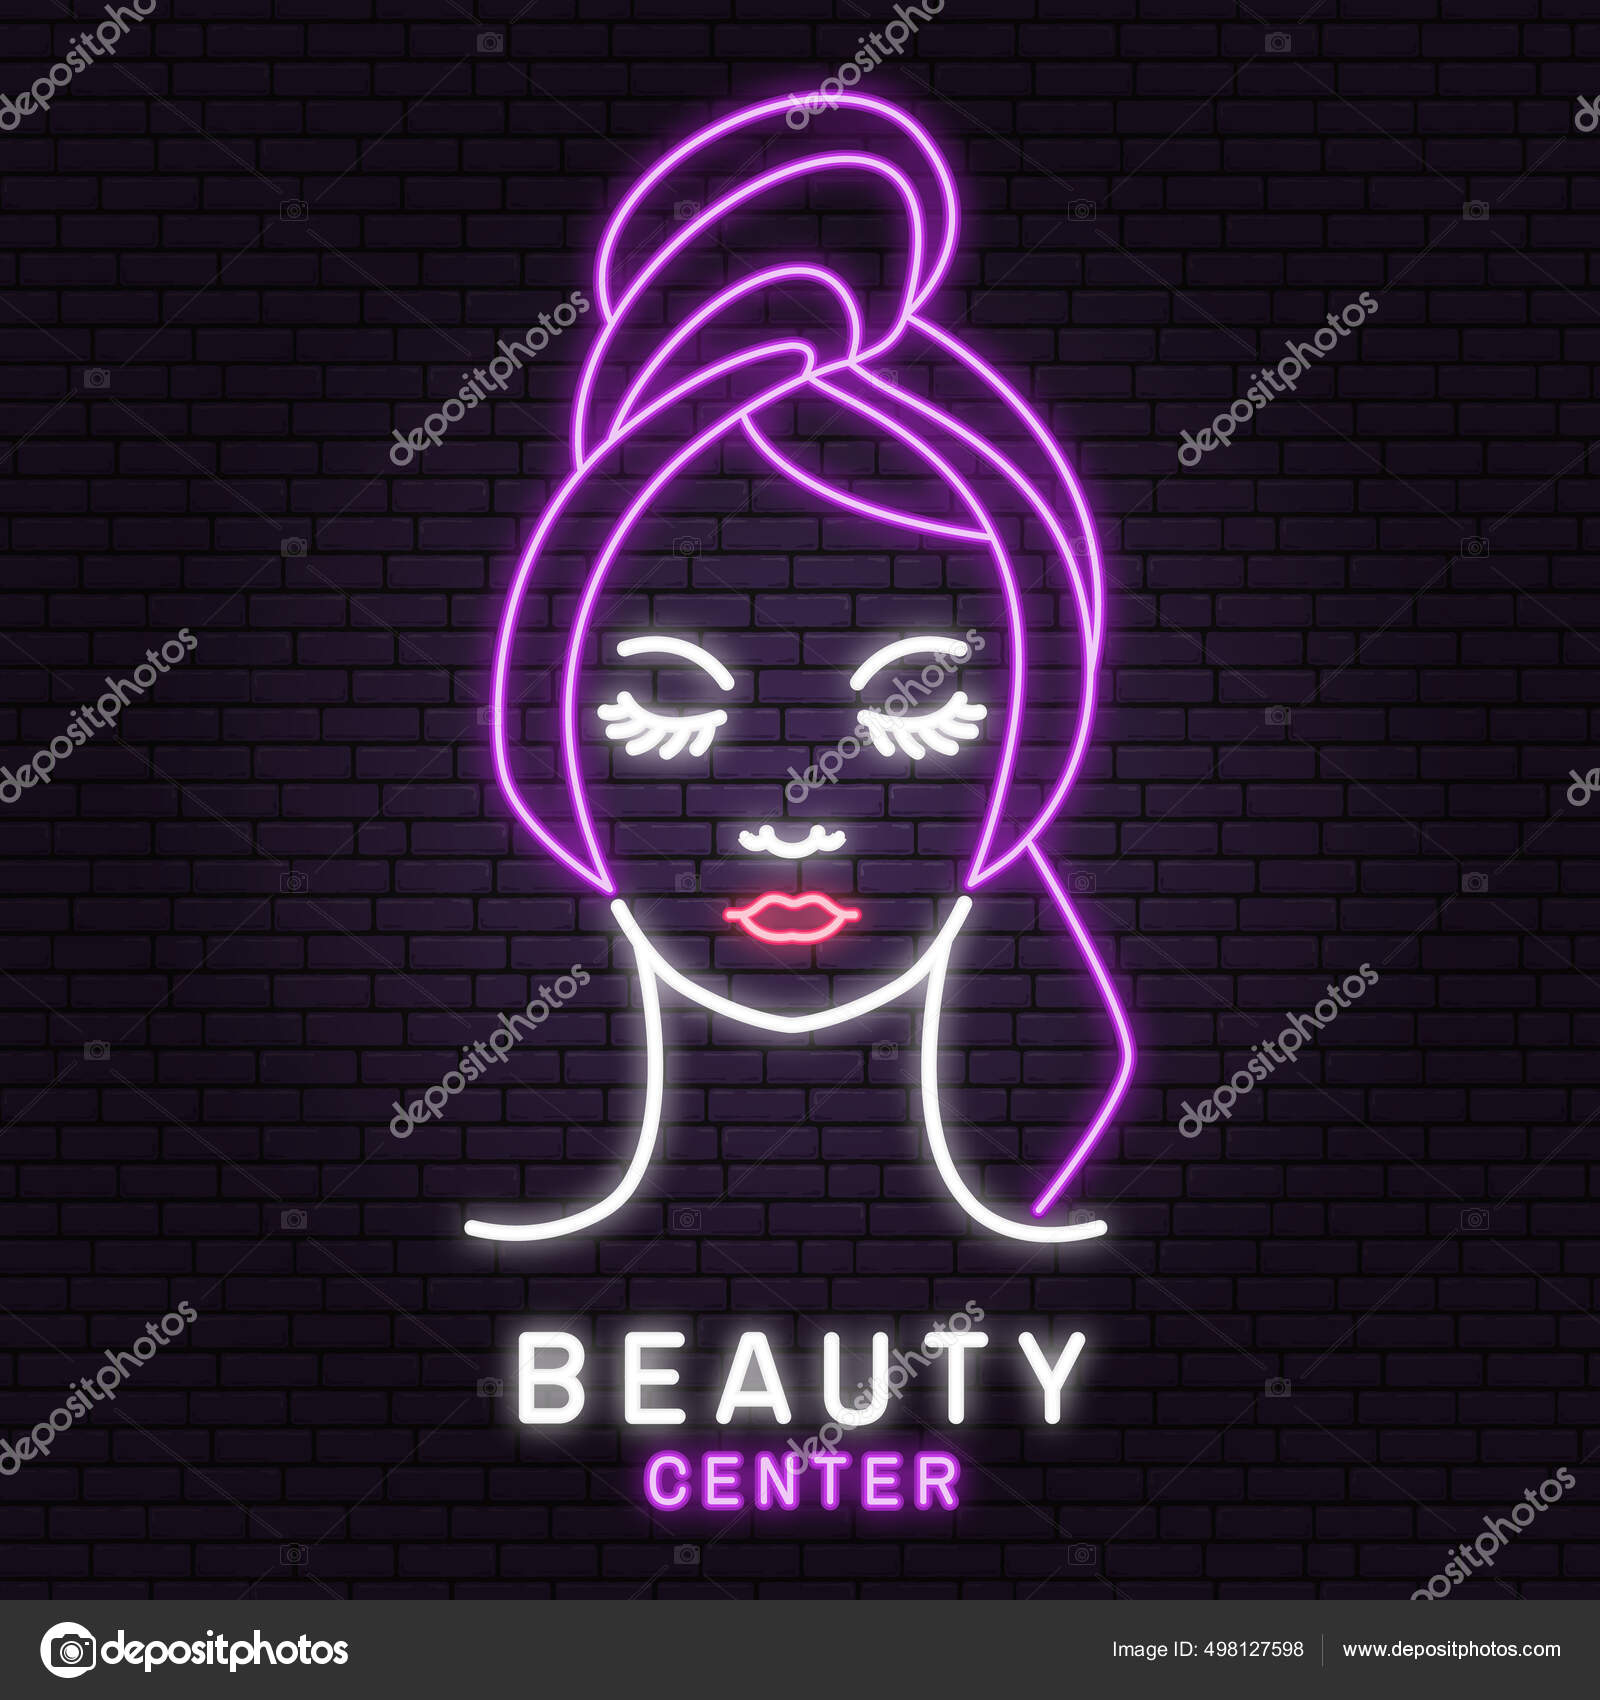 Neon sign. Woman face for logo, label, badge, emblem. Pretty lady